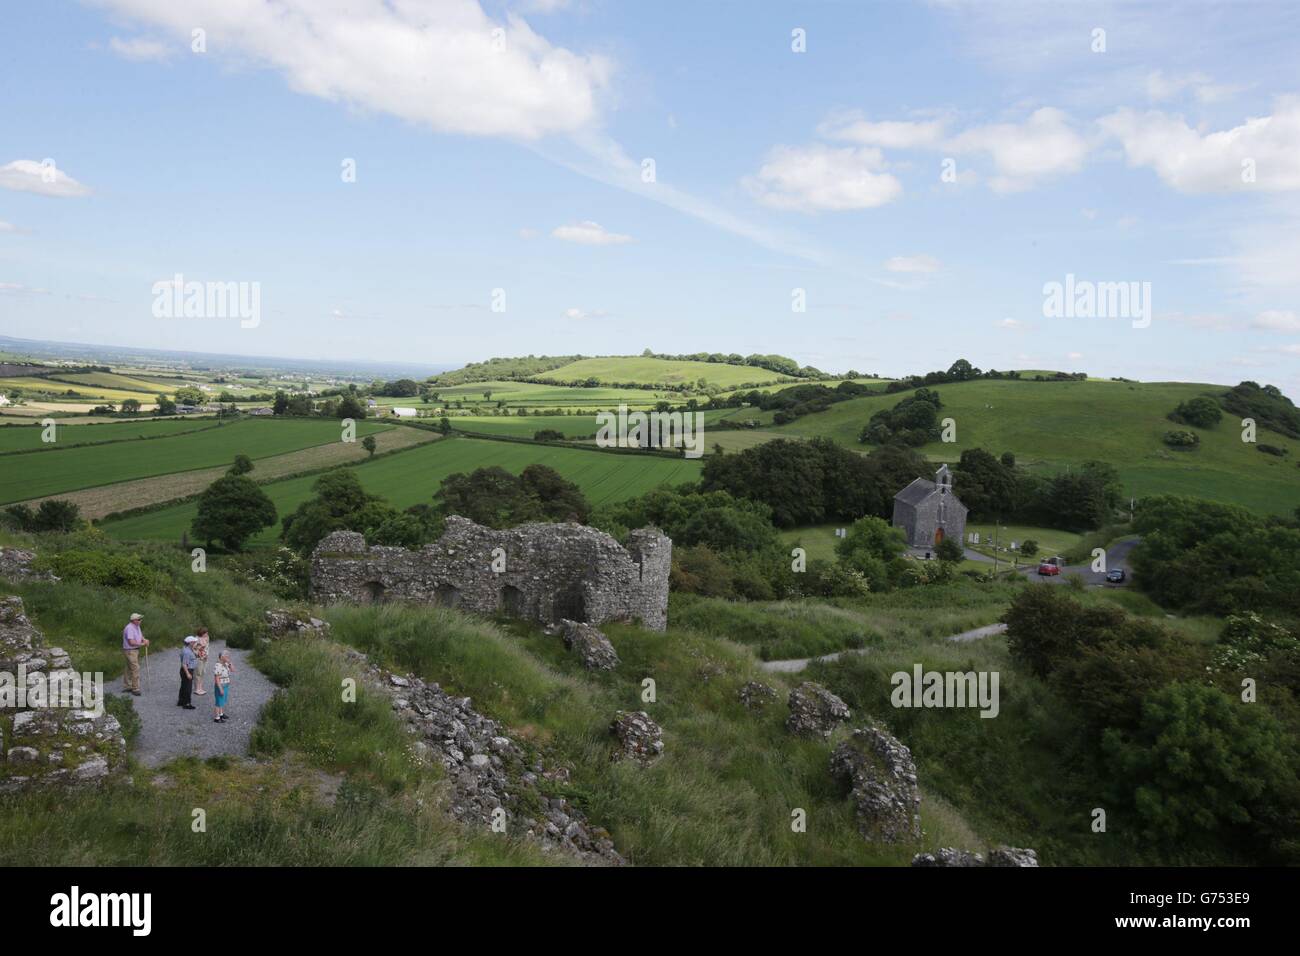 The view from The Rock of Dunamase, County Laois, during a period of hot weather. Stock Photo